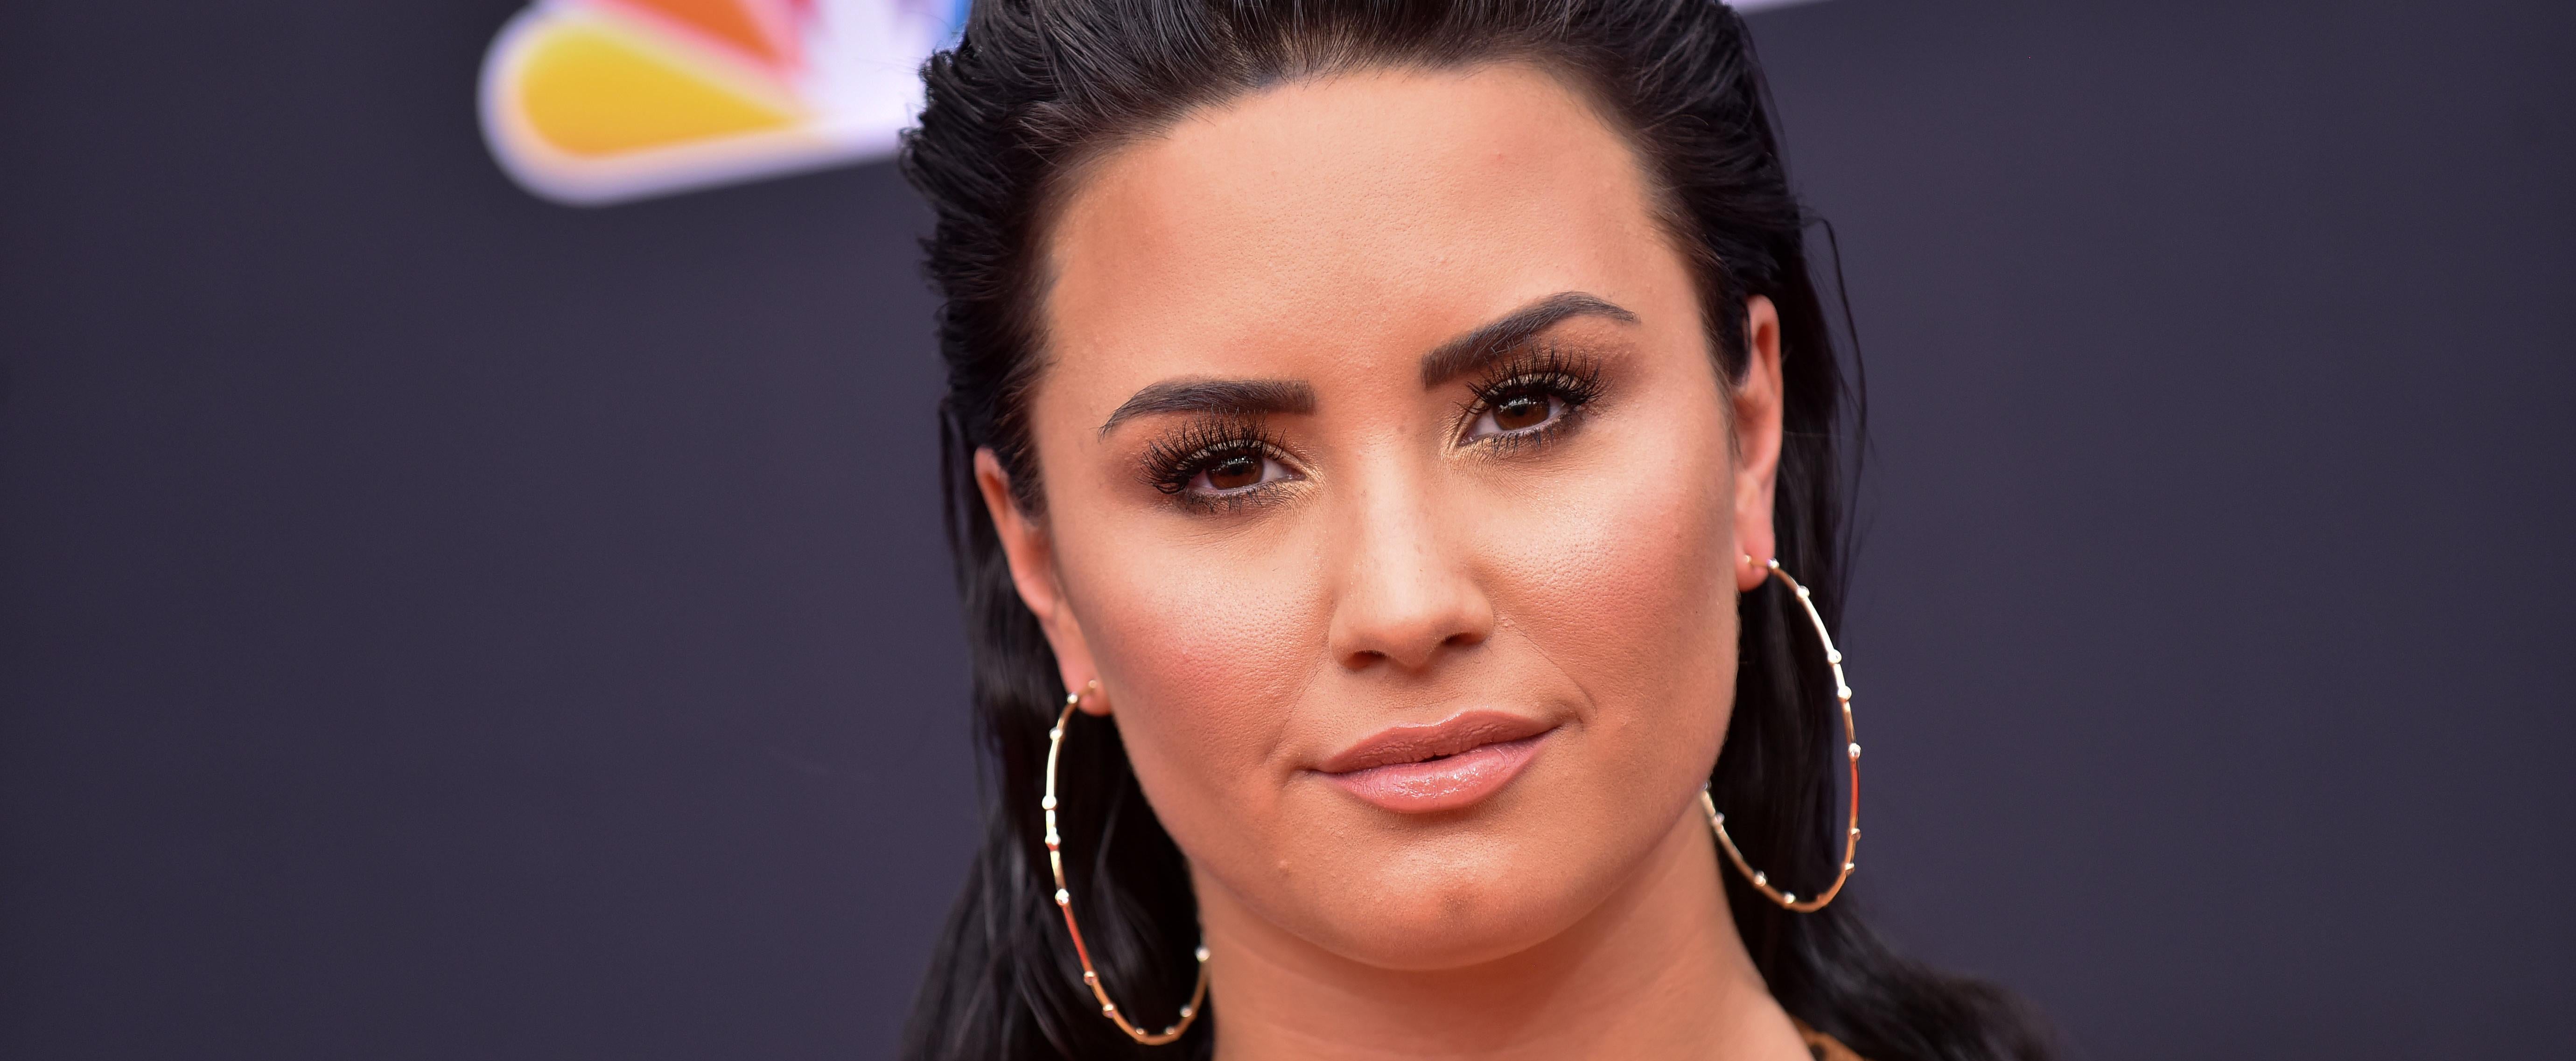 Demi Lovato's Health & Recovery Updates After 2018 Drug Overdose